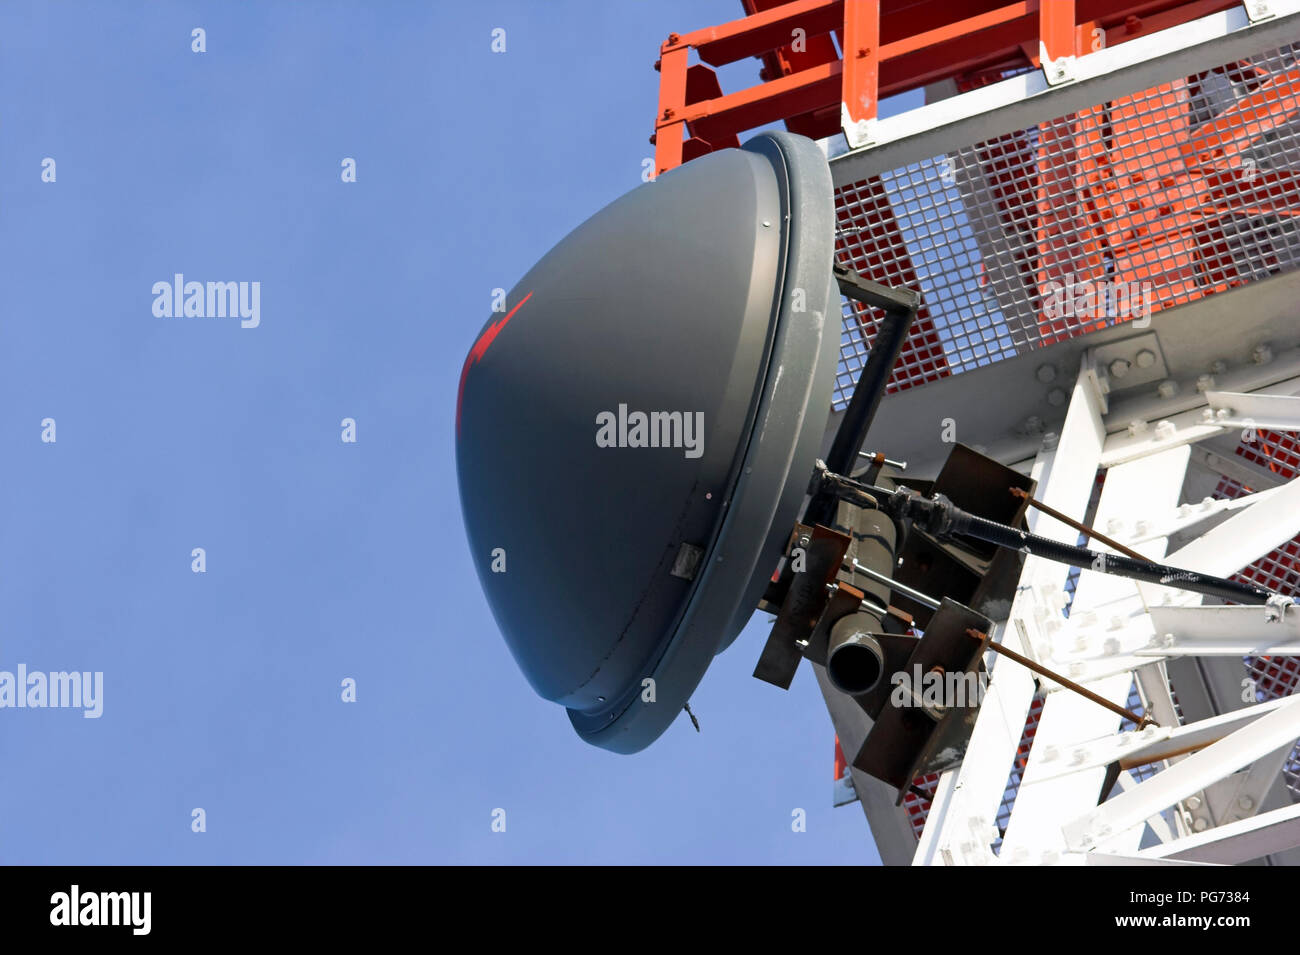 Part of a red and white tower of communication with antenna Stock Photo